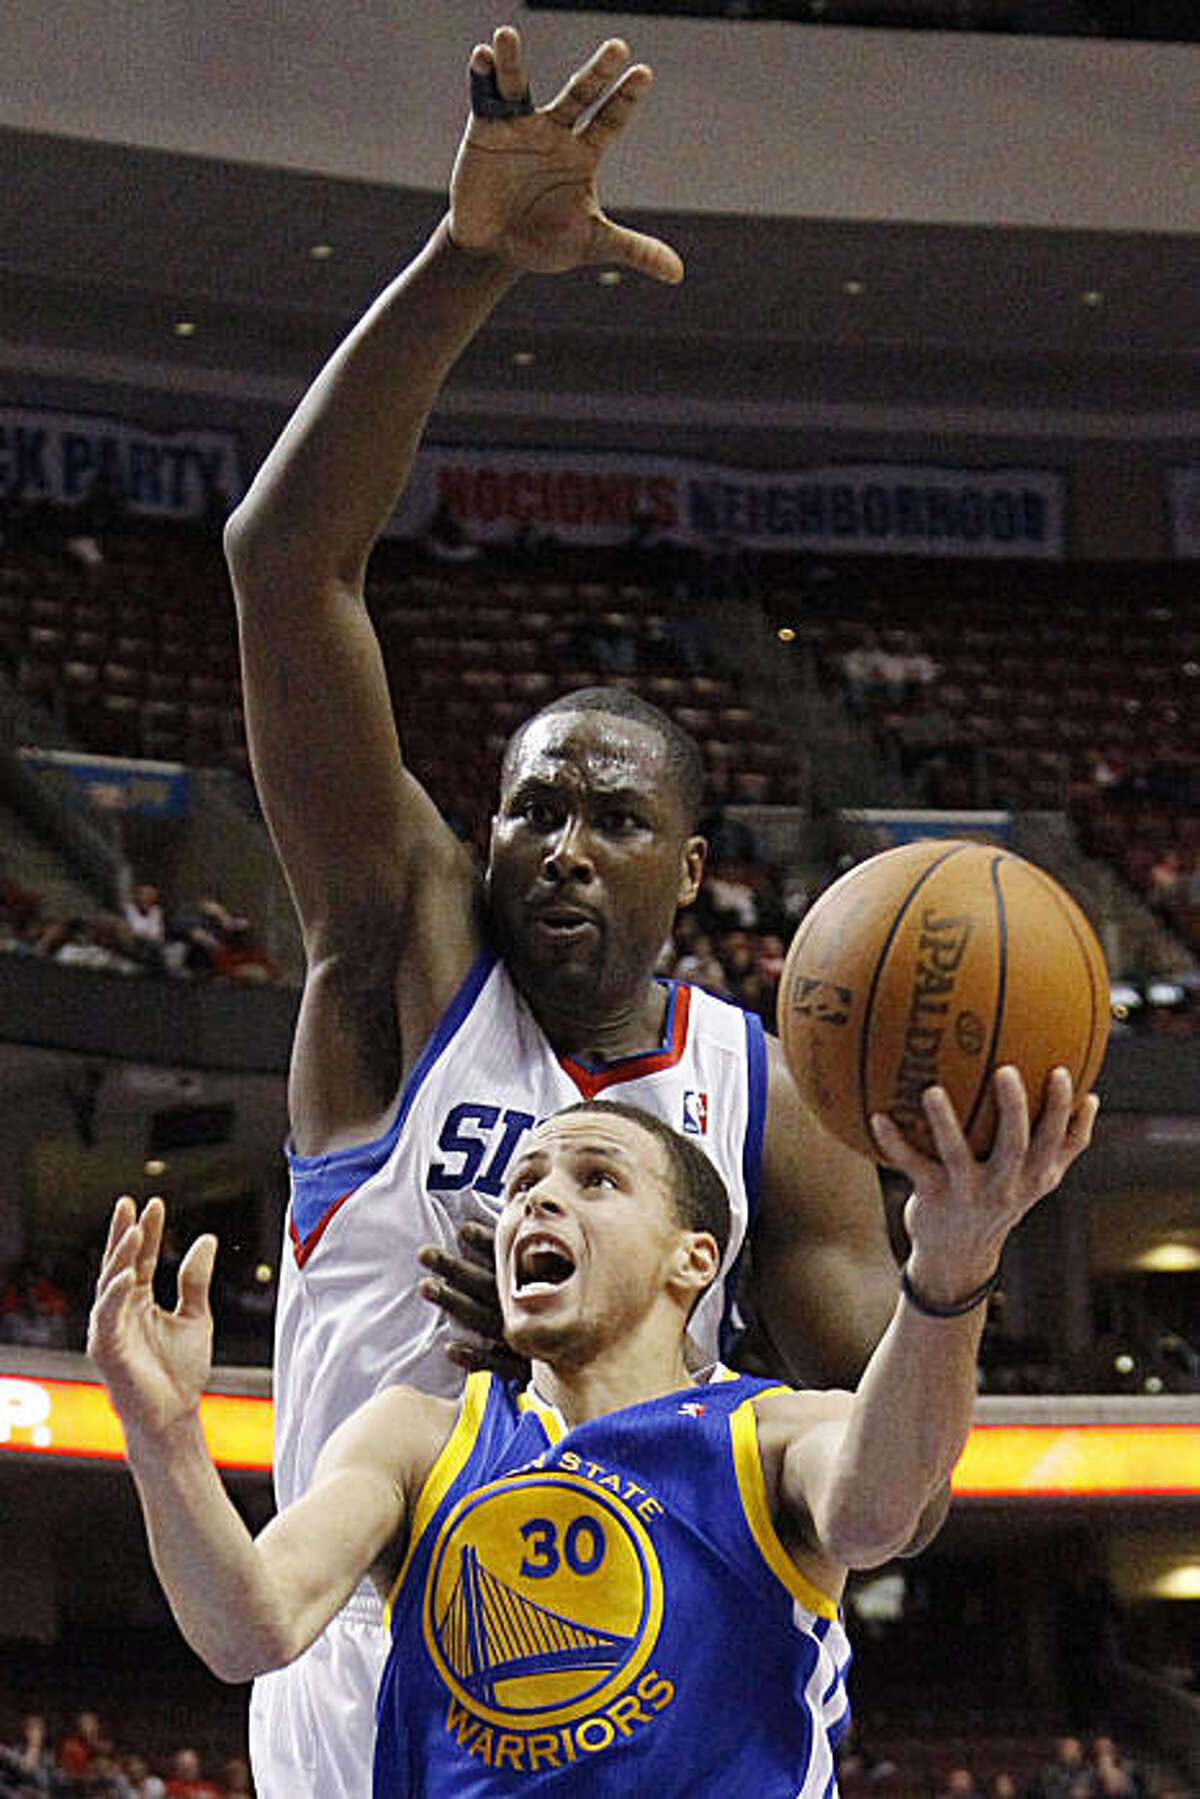 Golden State Warriors' Stephen Curry, bottom, goes up for a shot against Philadelphia 76ers' Elton Brand in the first half of an NBA basketball game on Sunday, March 6, 2011, in Philadelphia.